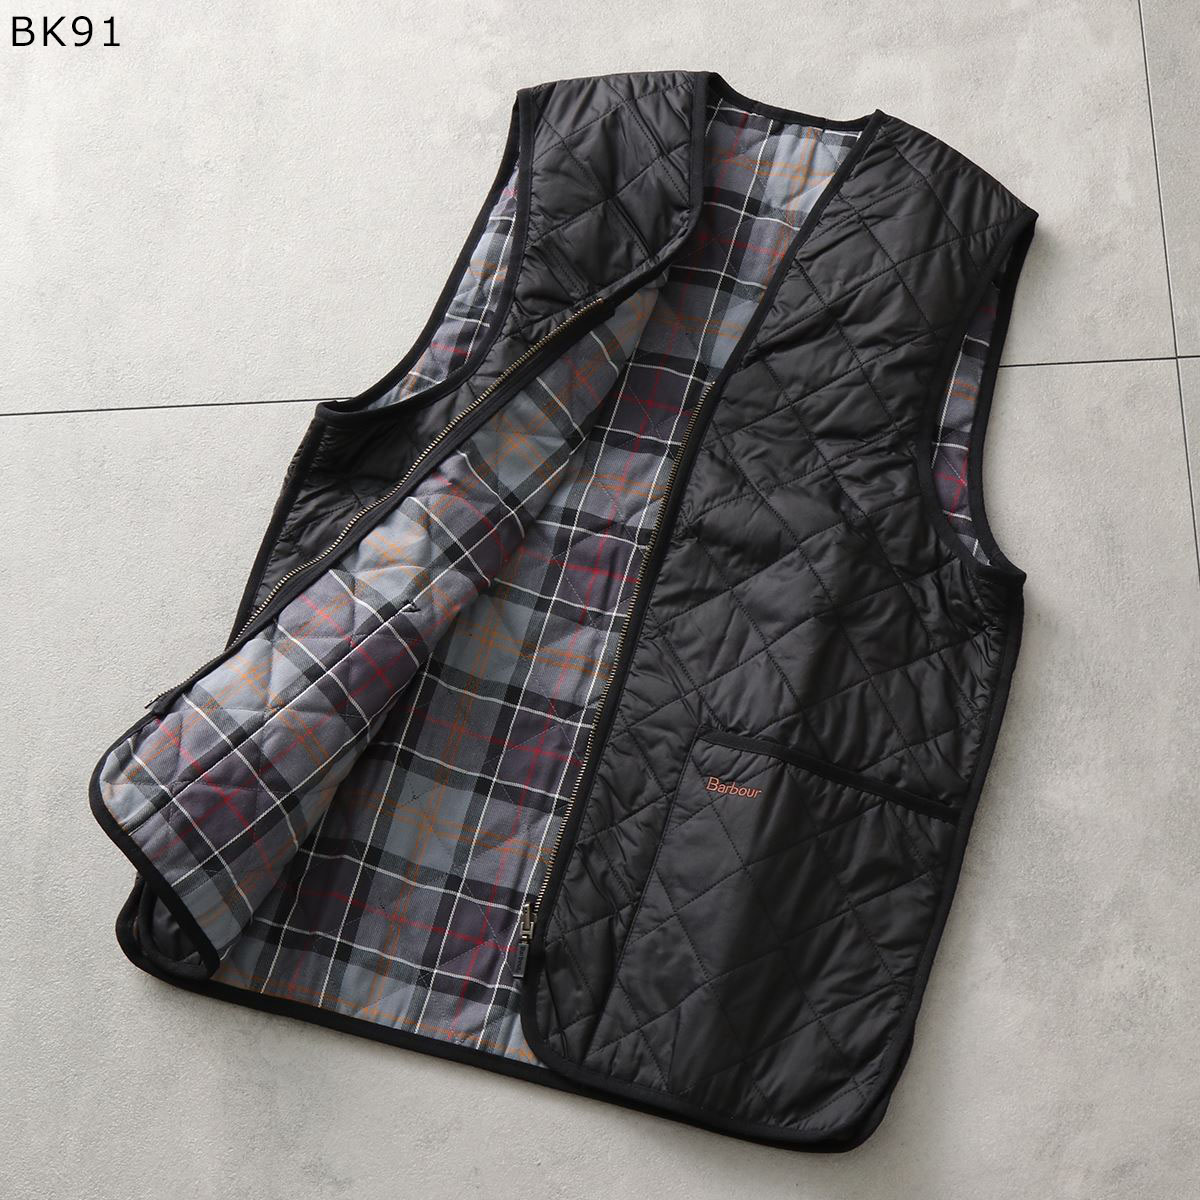 Barbour バブアー キルティング ベスト MLI0001 QUILTED WAISTCOAT ZIP IN LINER メンズ ジレ ライナー カラー5色｜s-musee｜02